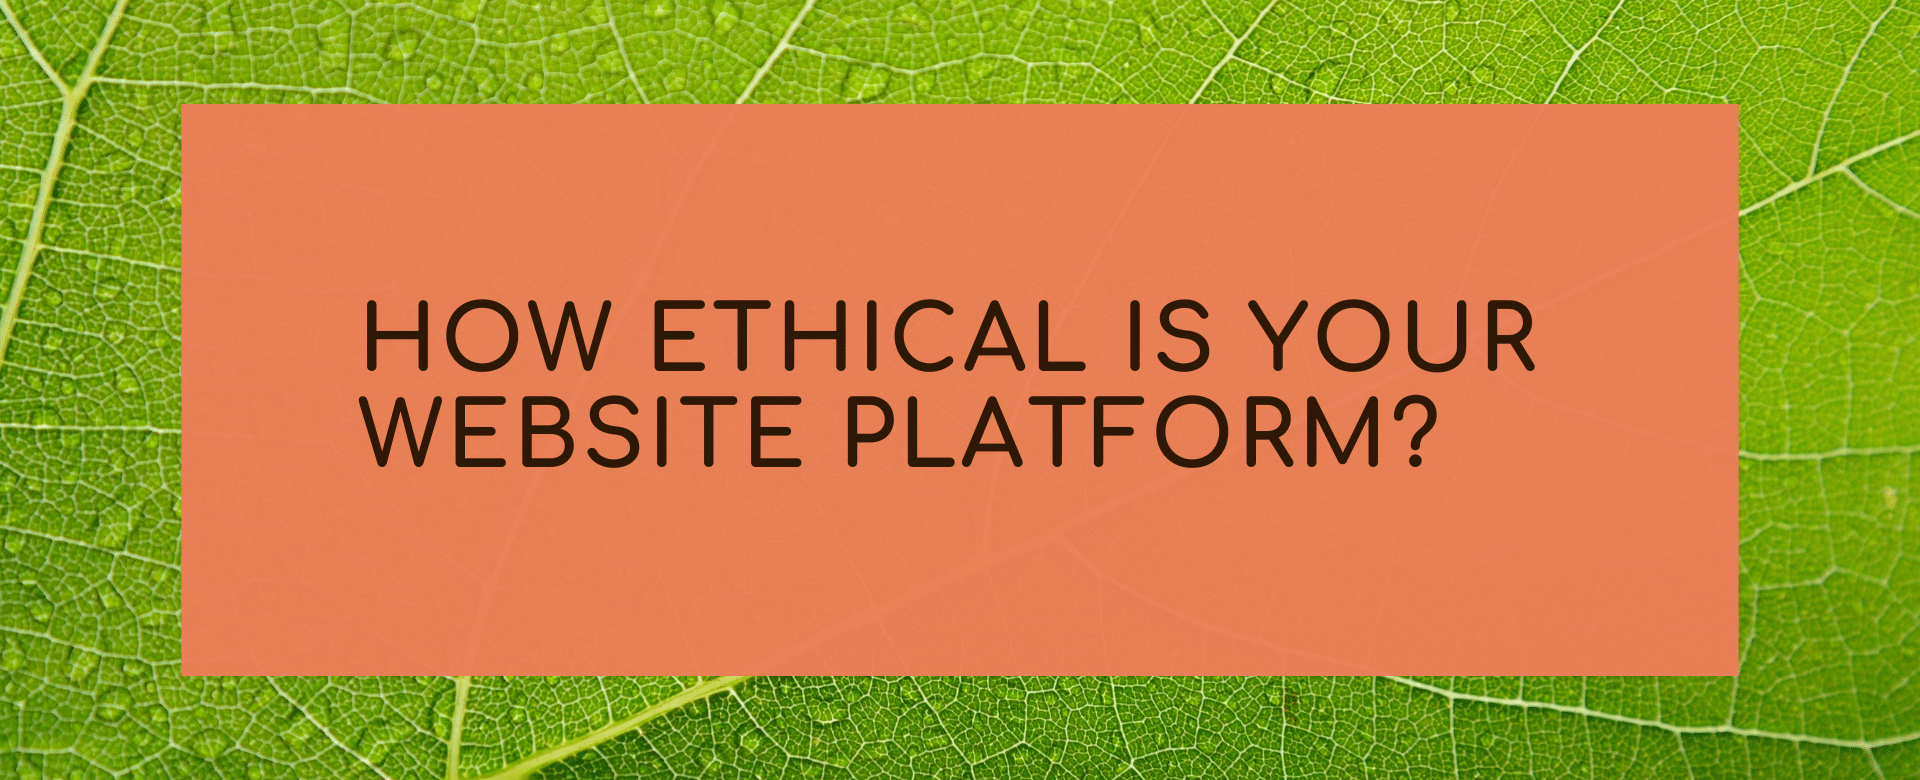 How ethical is your website platform?